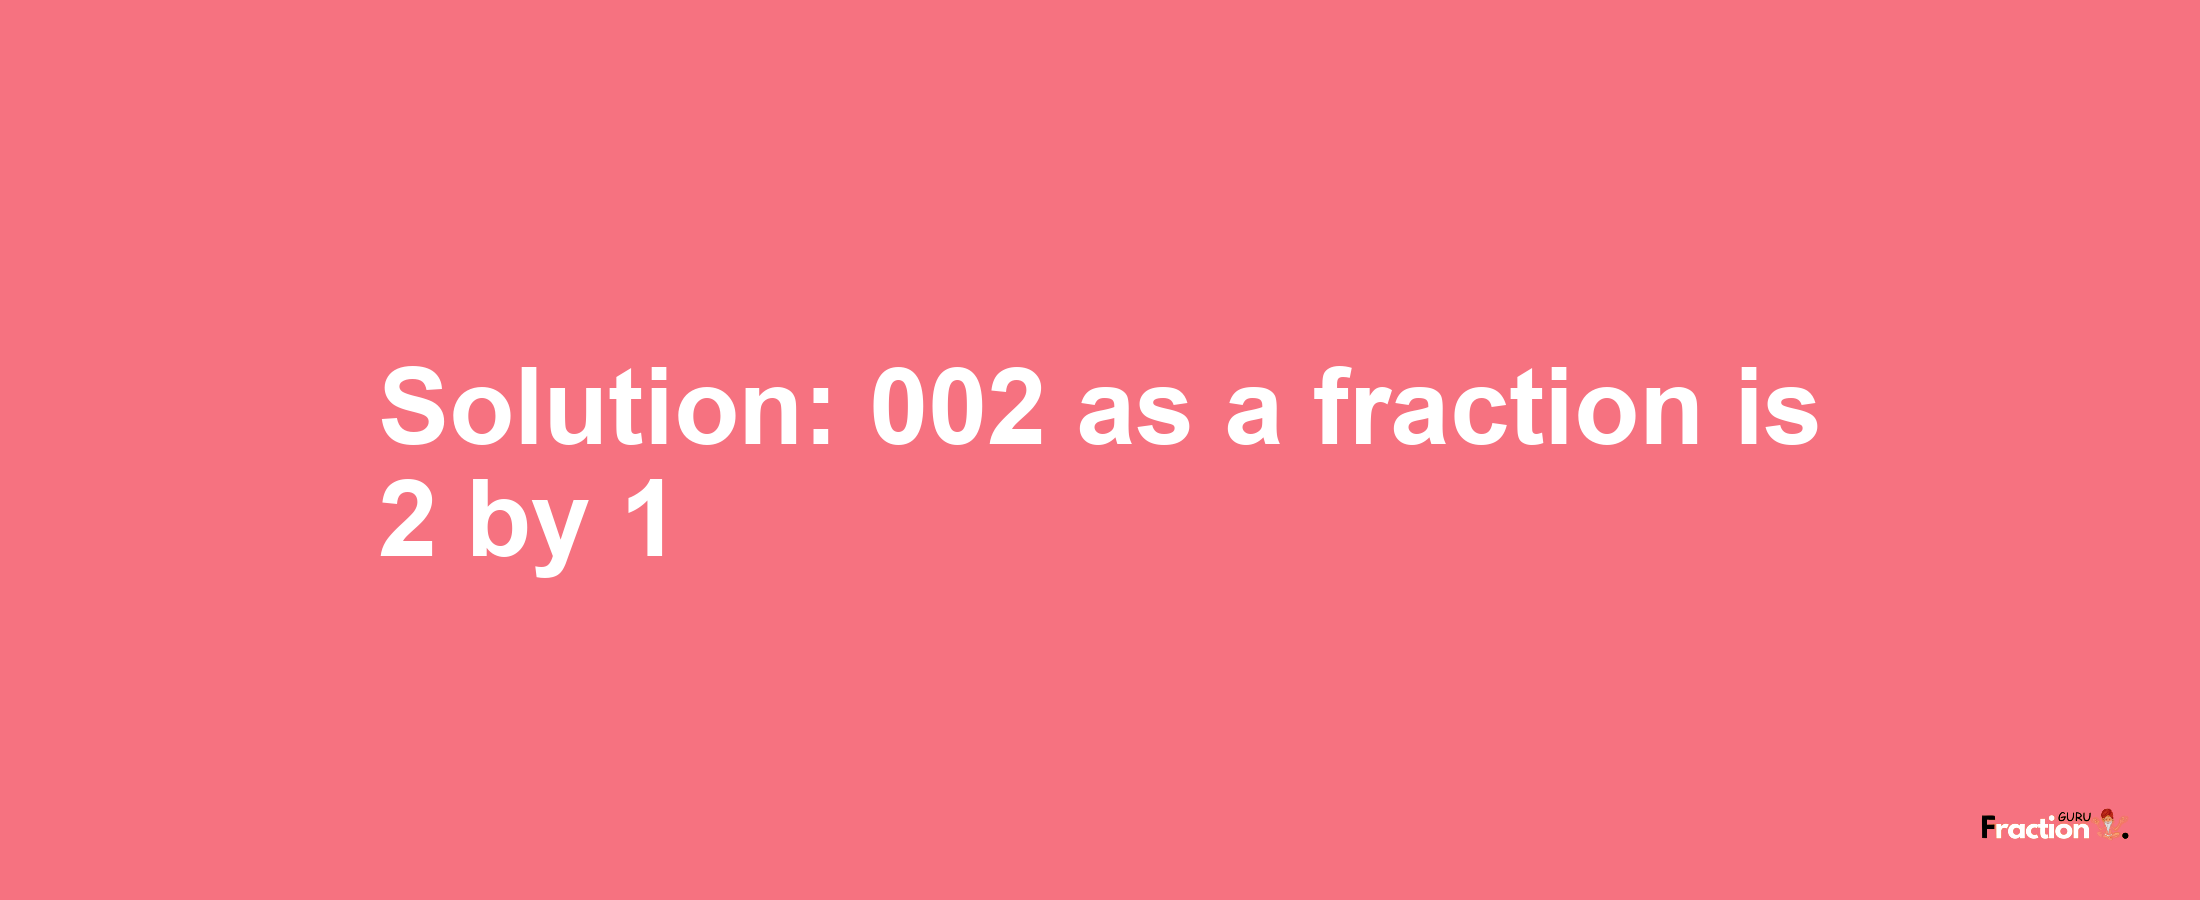 Solution:002 as a fraction is 2/1